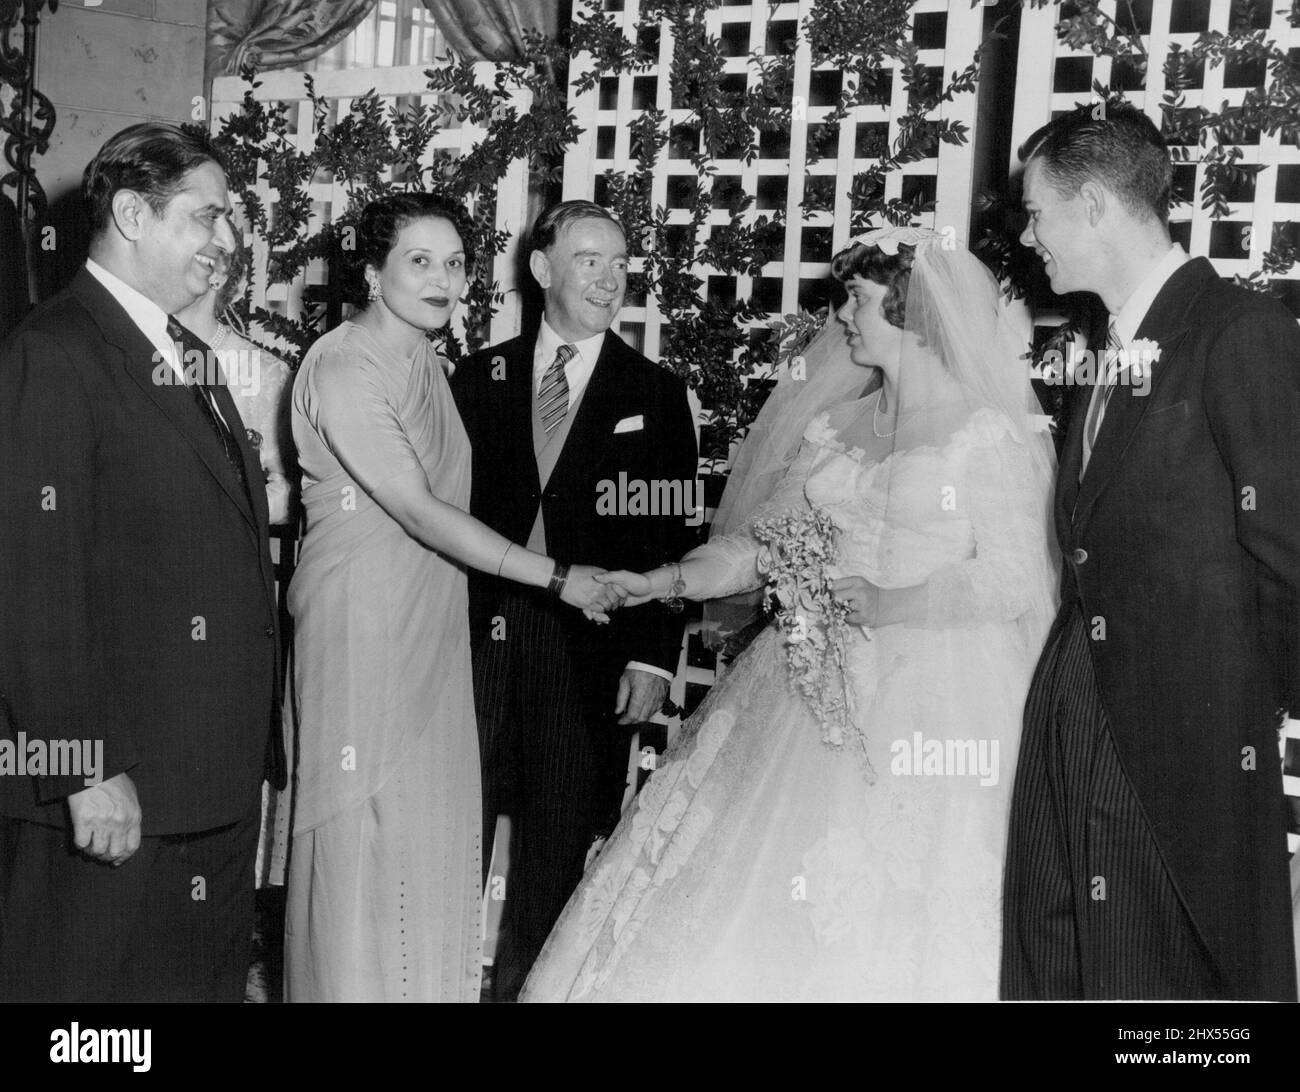 Spencer - Lynch Wedding -- Mrs. Peter Spencer greets the Ambassador of Pakistan and Begum Syed Amjad Ali at the wedding reception at the Sheraton Carlton Hotel, Washington, while Sir Percy and Peter Spencer look on. July 02, 1954. (Photo by Reni Photos). Stock Photo